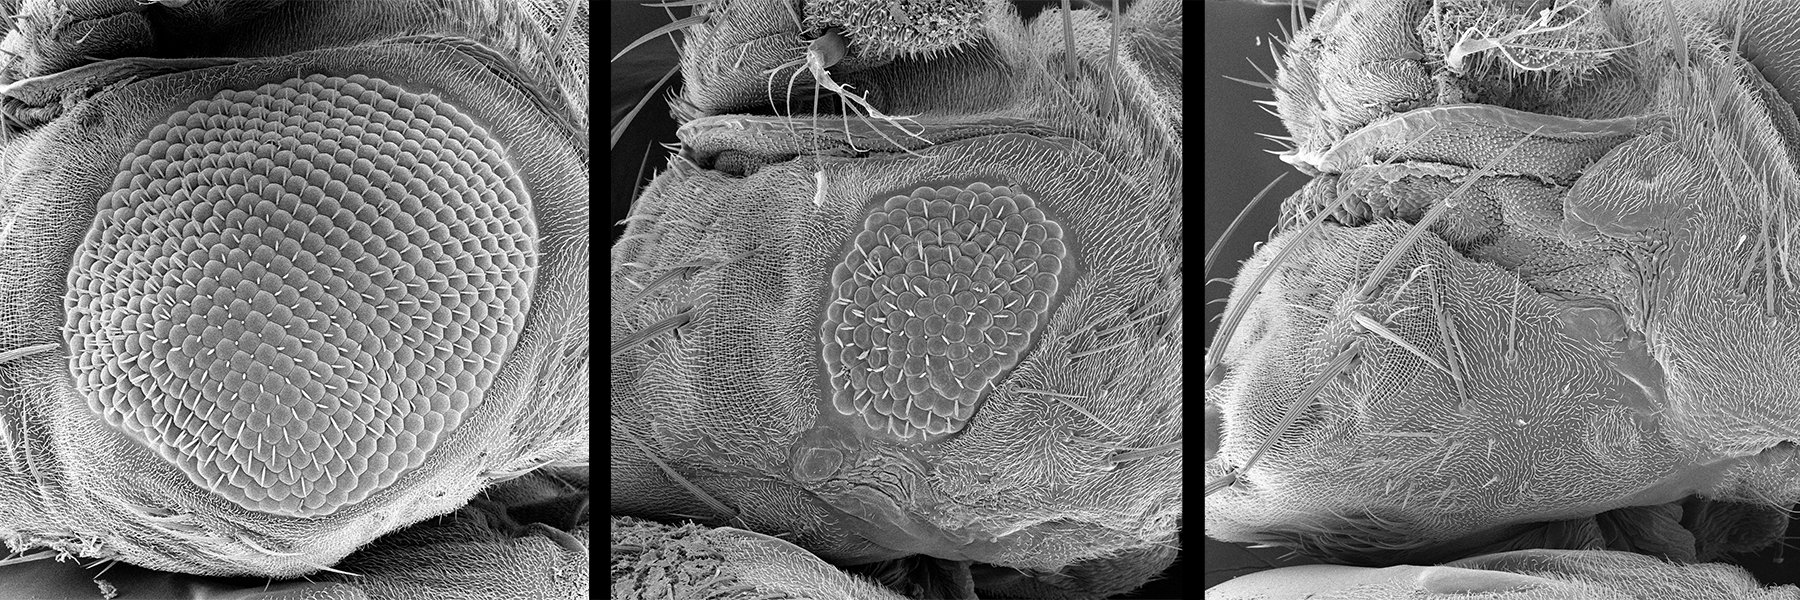 SEM image of fruit fly compound eyes from the laboratory of Justin Kumar.  The leftmost image is a wild type eye while the other two are mutants that have fewer (middle image) and no (leftmost image) ommatidia.